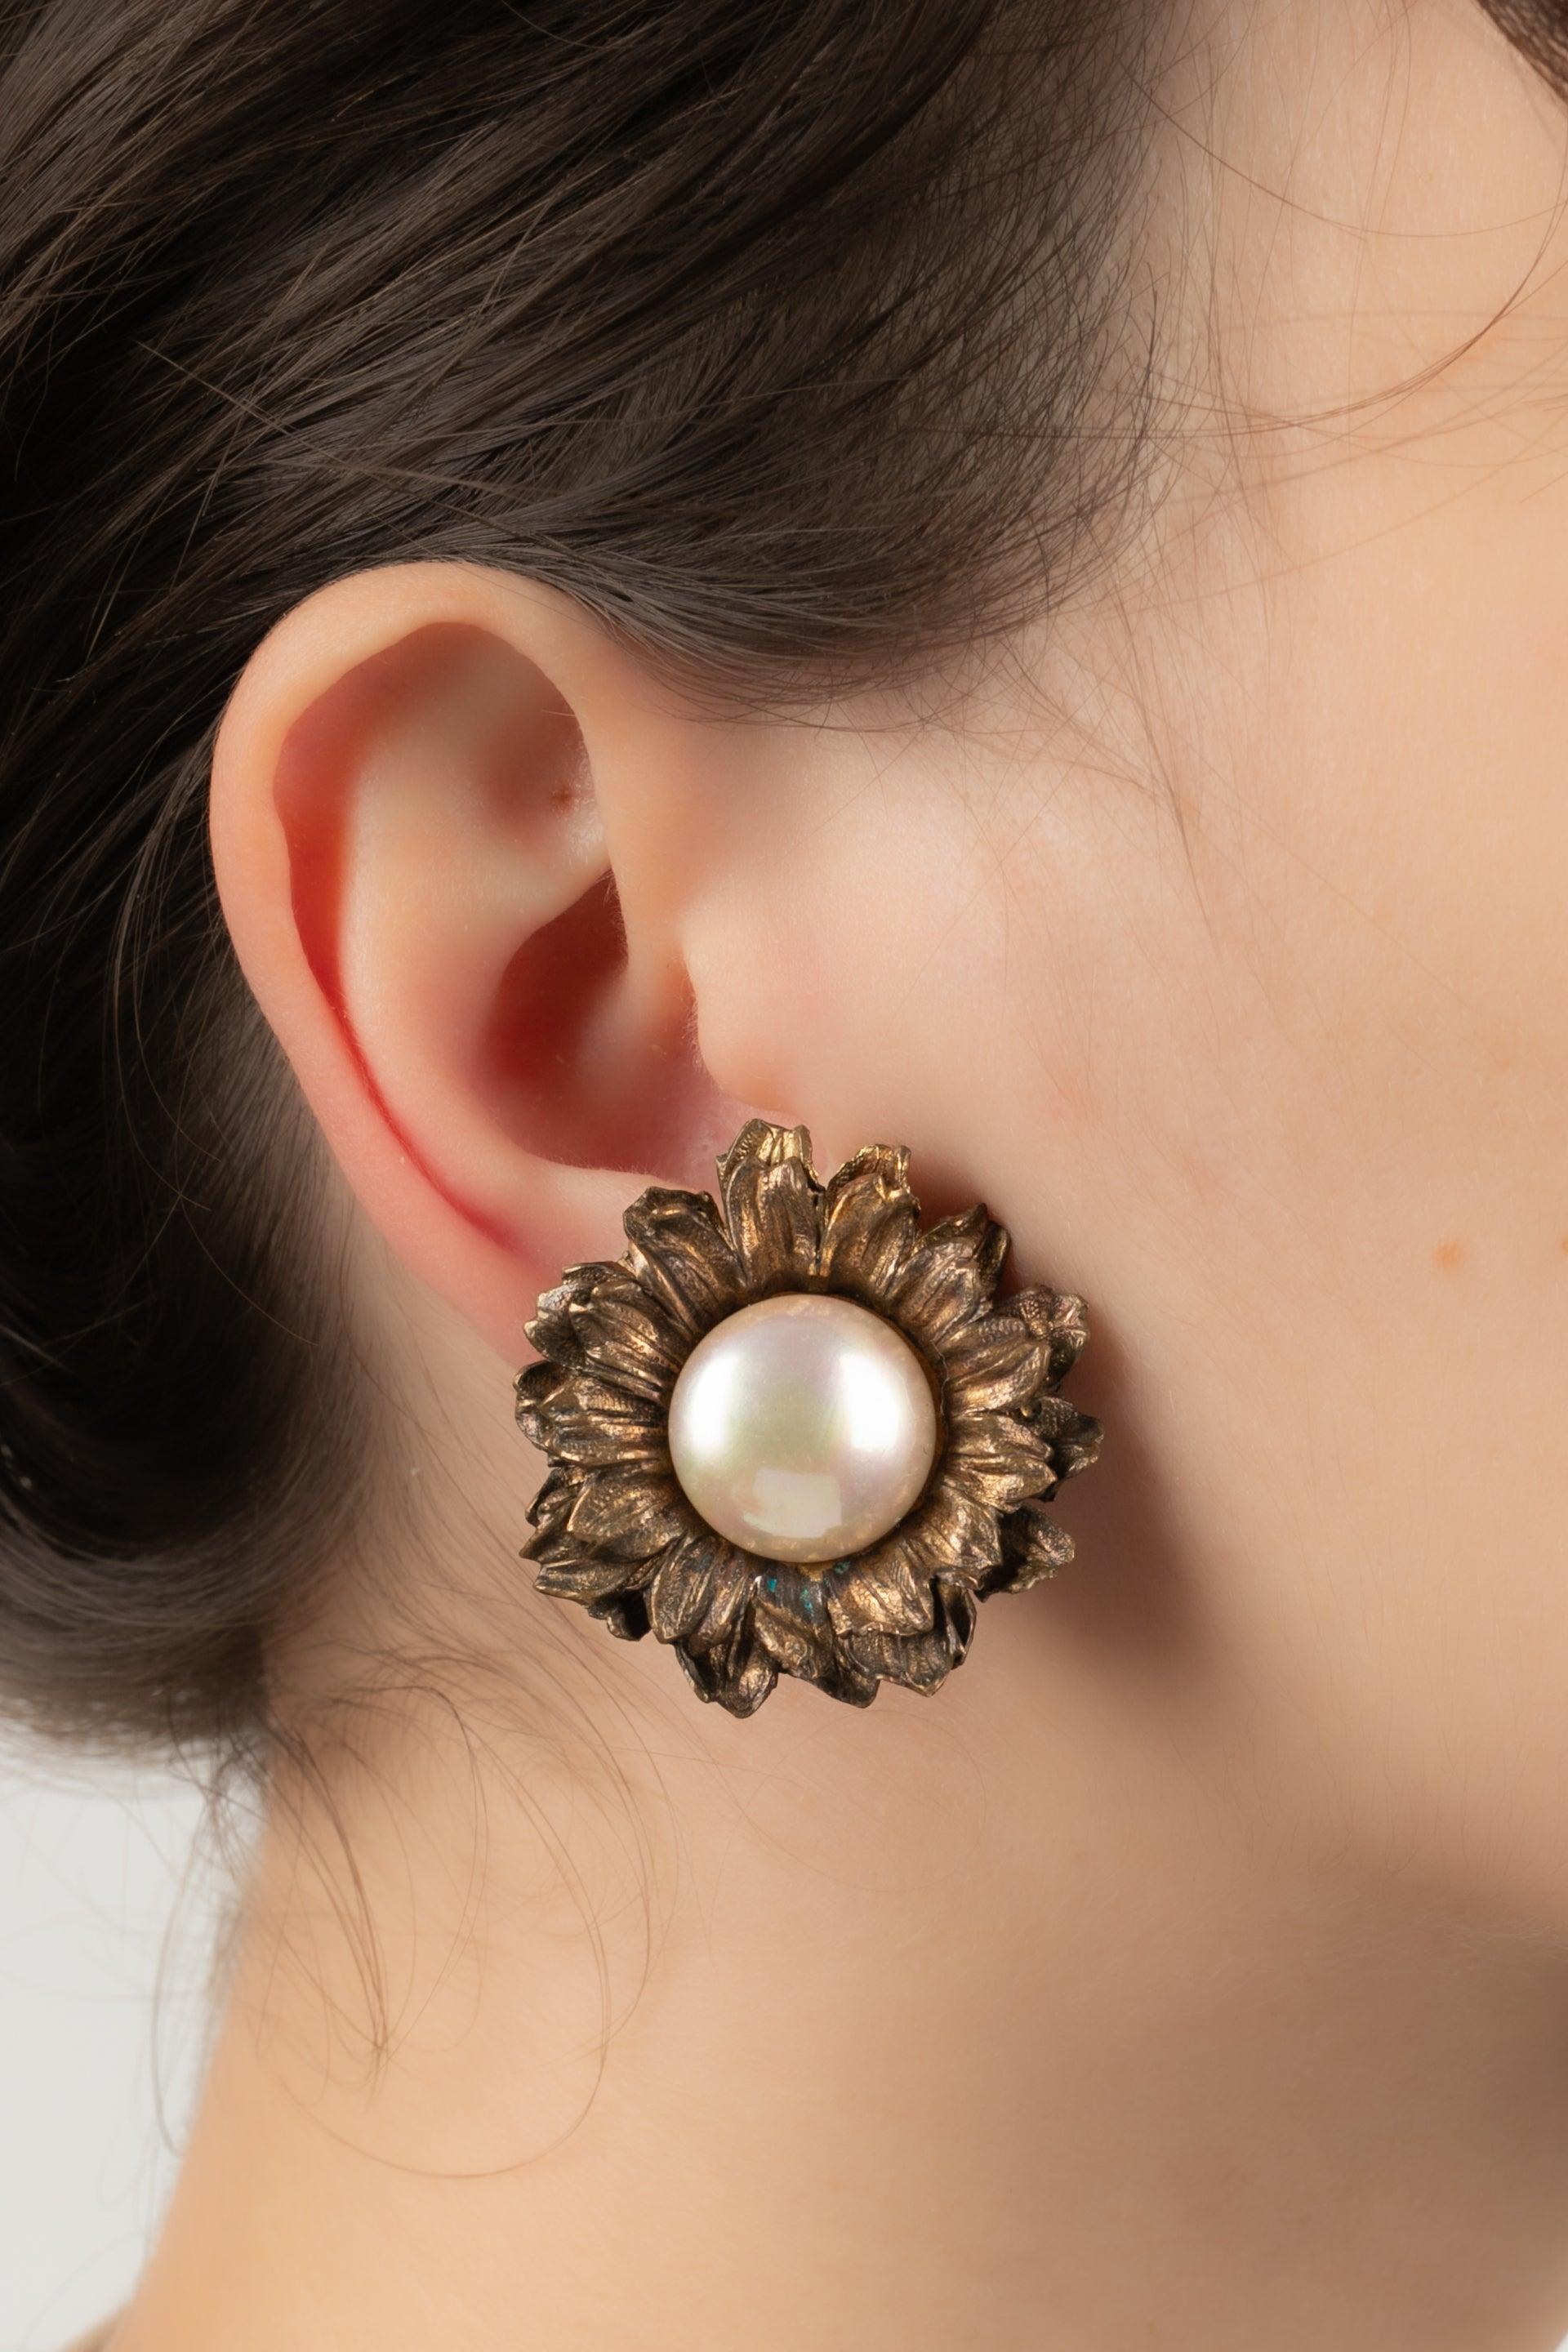 Chanel - Dark-golden metal earrings with costume pearly cabochons.

Additional information:
Condition: Very good condition
Dimensions: Height: 3.5 cm

Seller Reference: BOB225